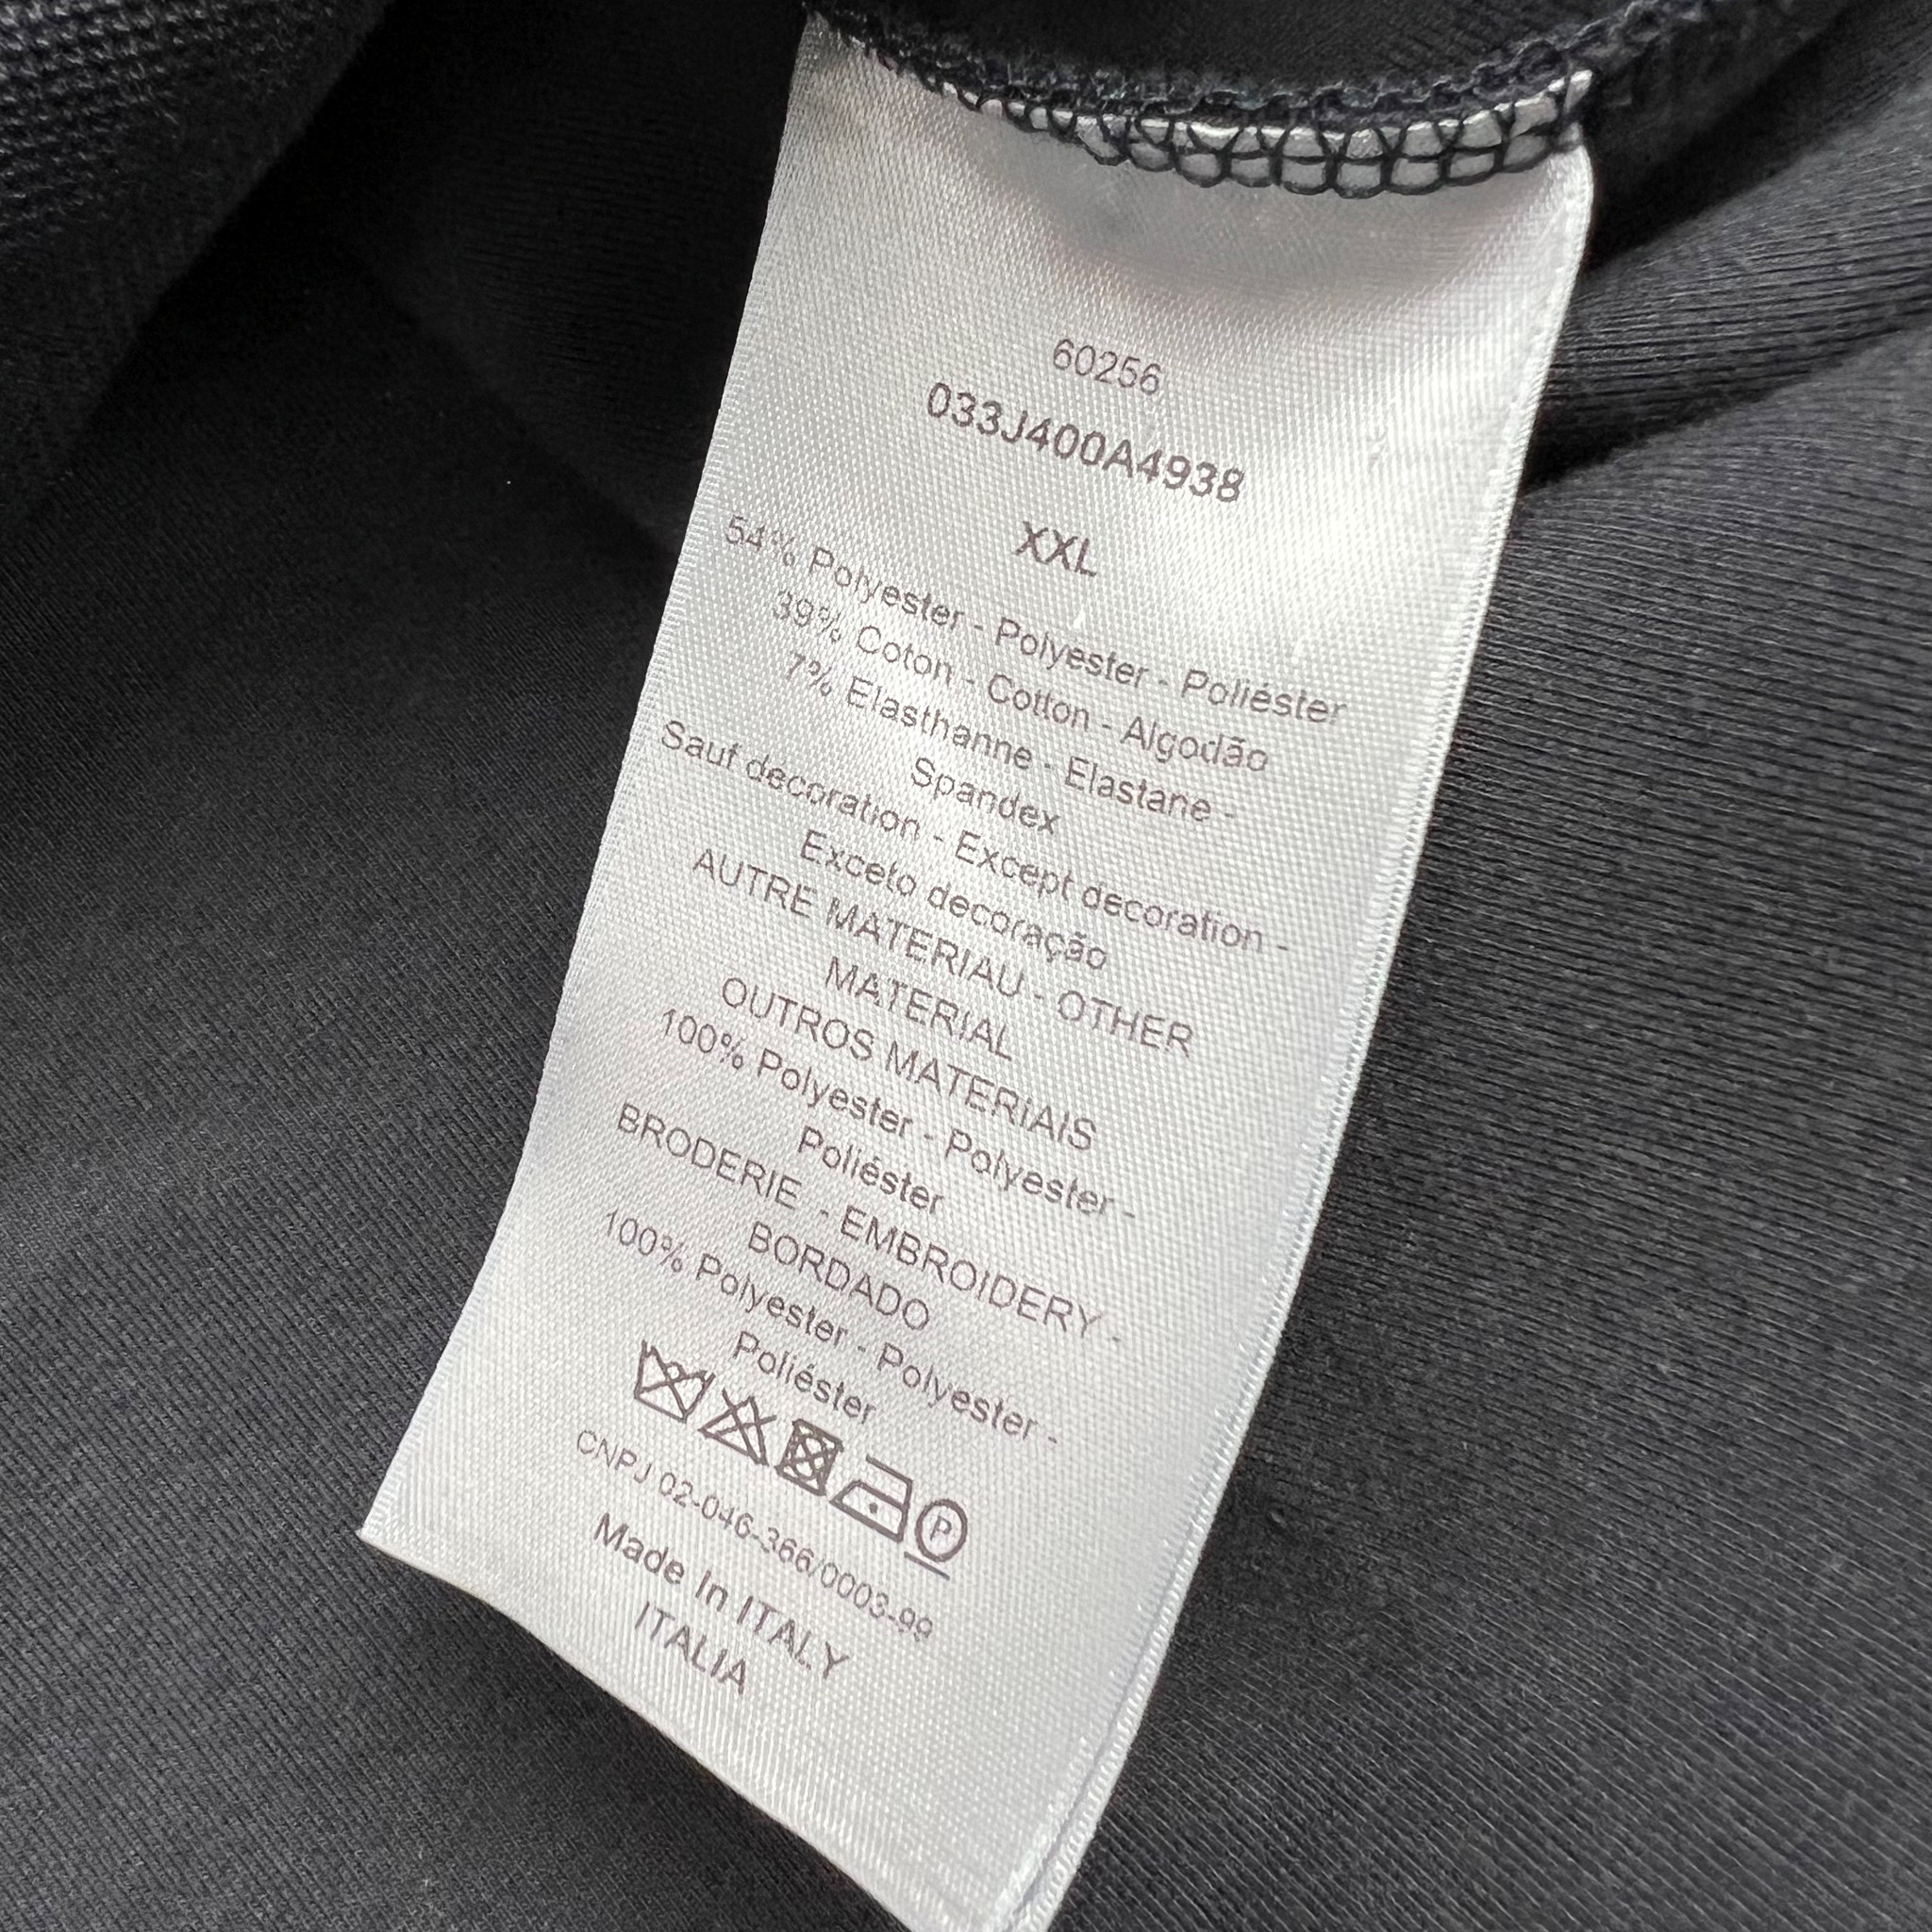 Christian Dior x Shawn Stussy Oblique Anorak Jacket - Oliver's Archive